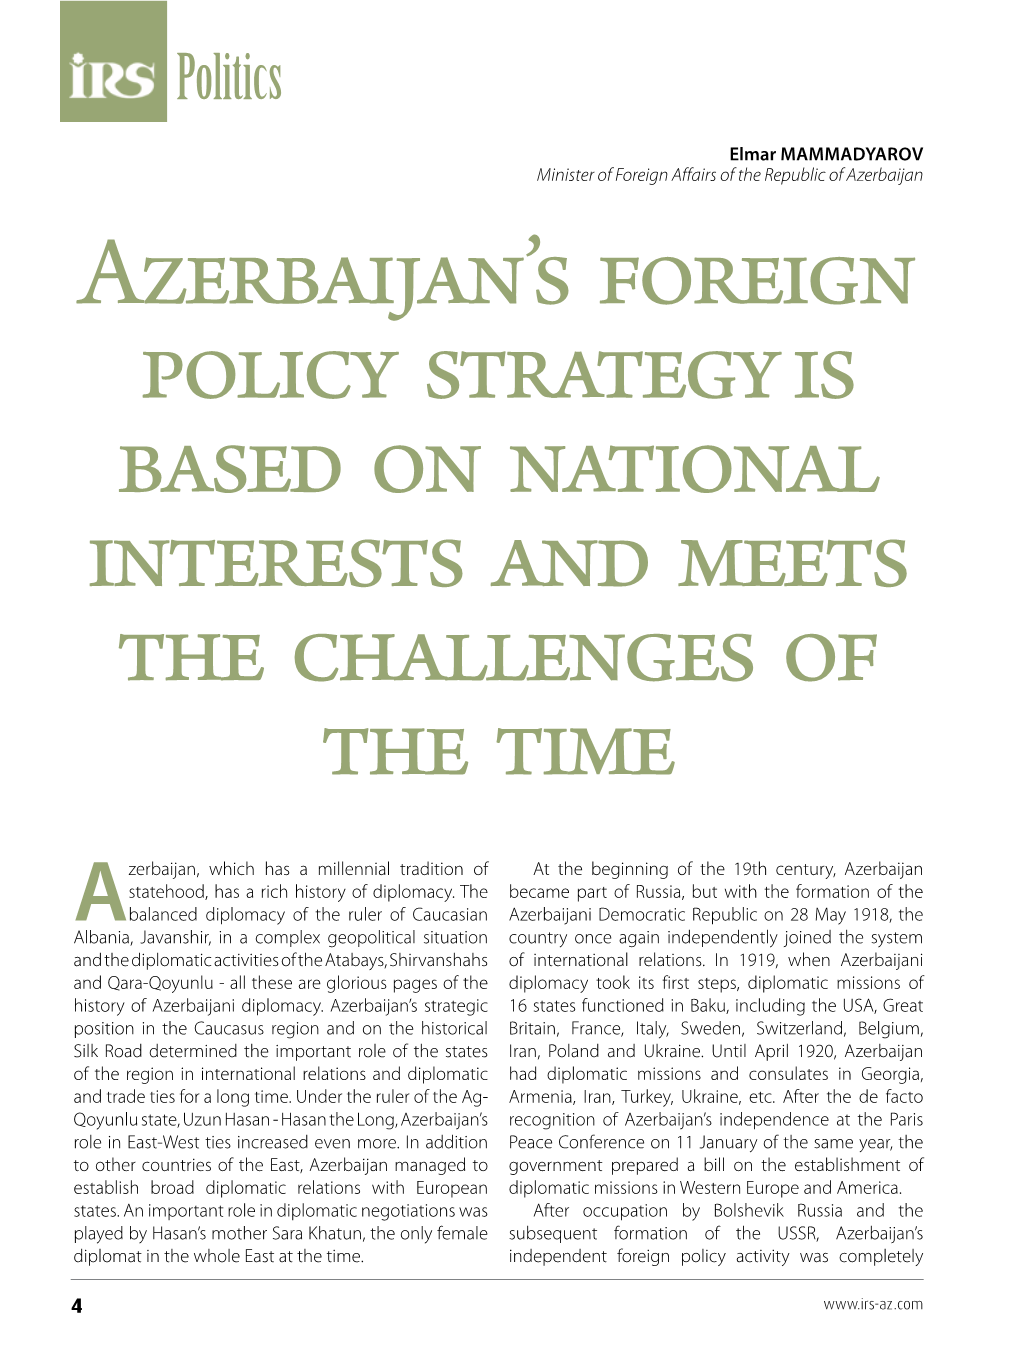 Azerbaijan's Foreign Policy Strategy Is Based on National Interests And